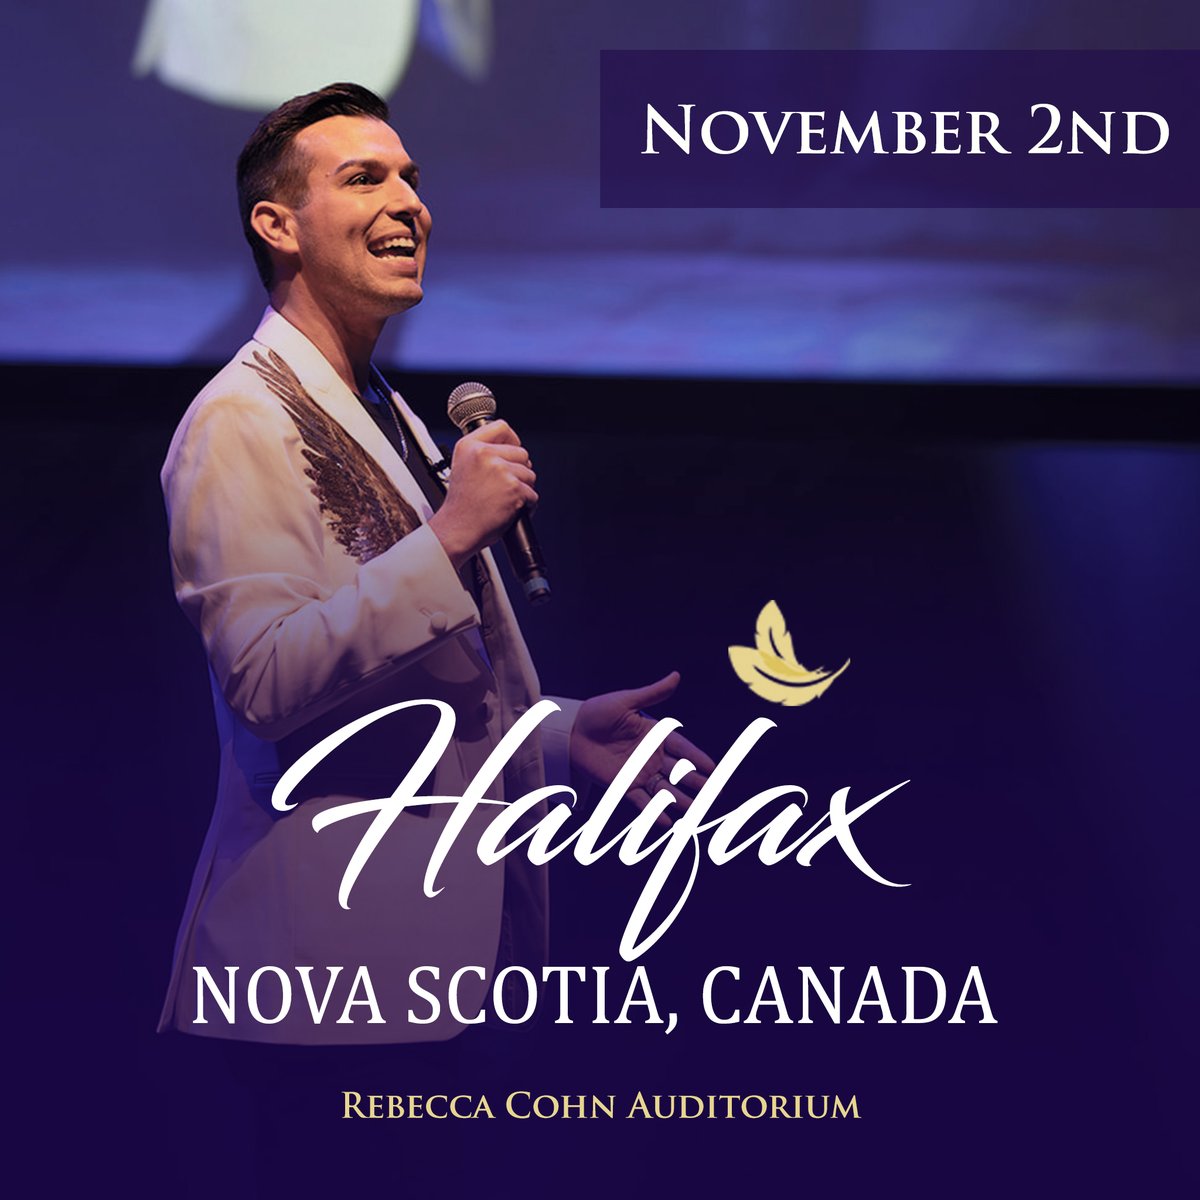 🇨🇦 Halifax fans, get ready for a night to remember. Join Matt Fraser at the Rebecca Cohn Auditorium on November 2nd and experience the many messages from spirit. Tickets are selling fast, secure yours at MeetMattFraser.com